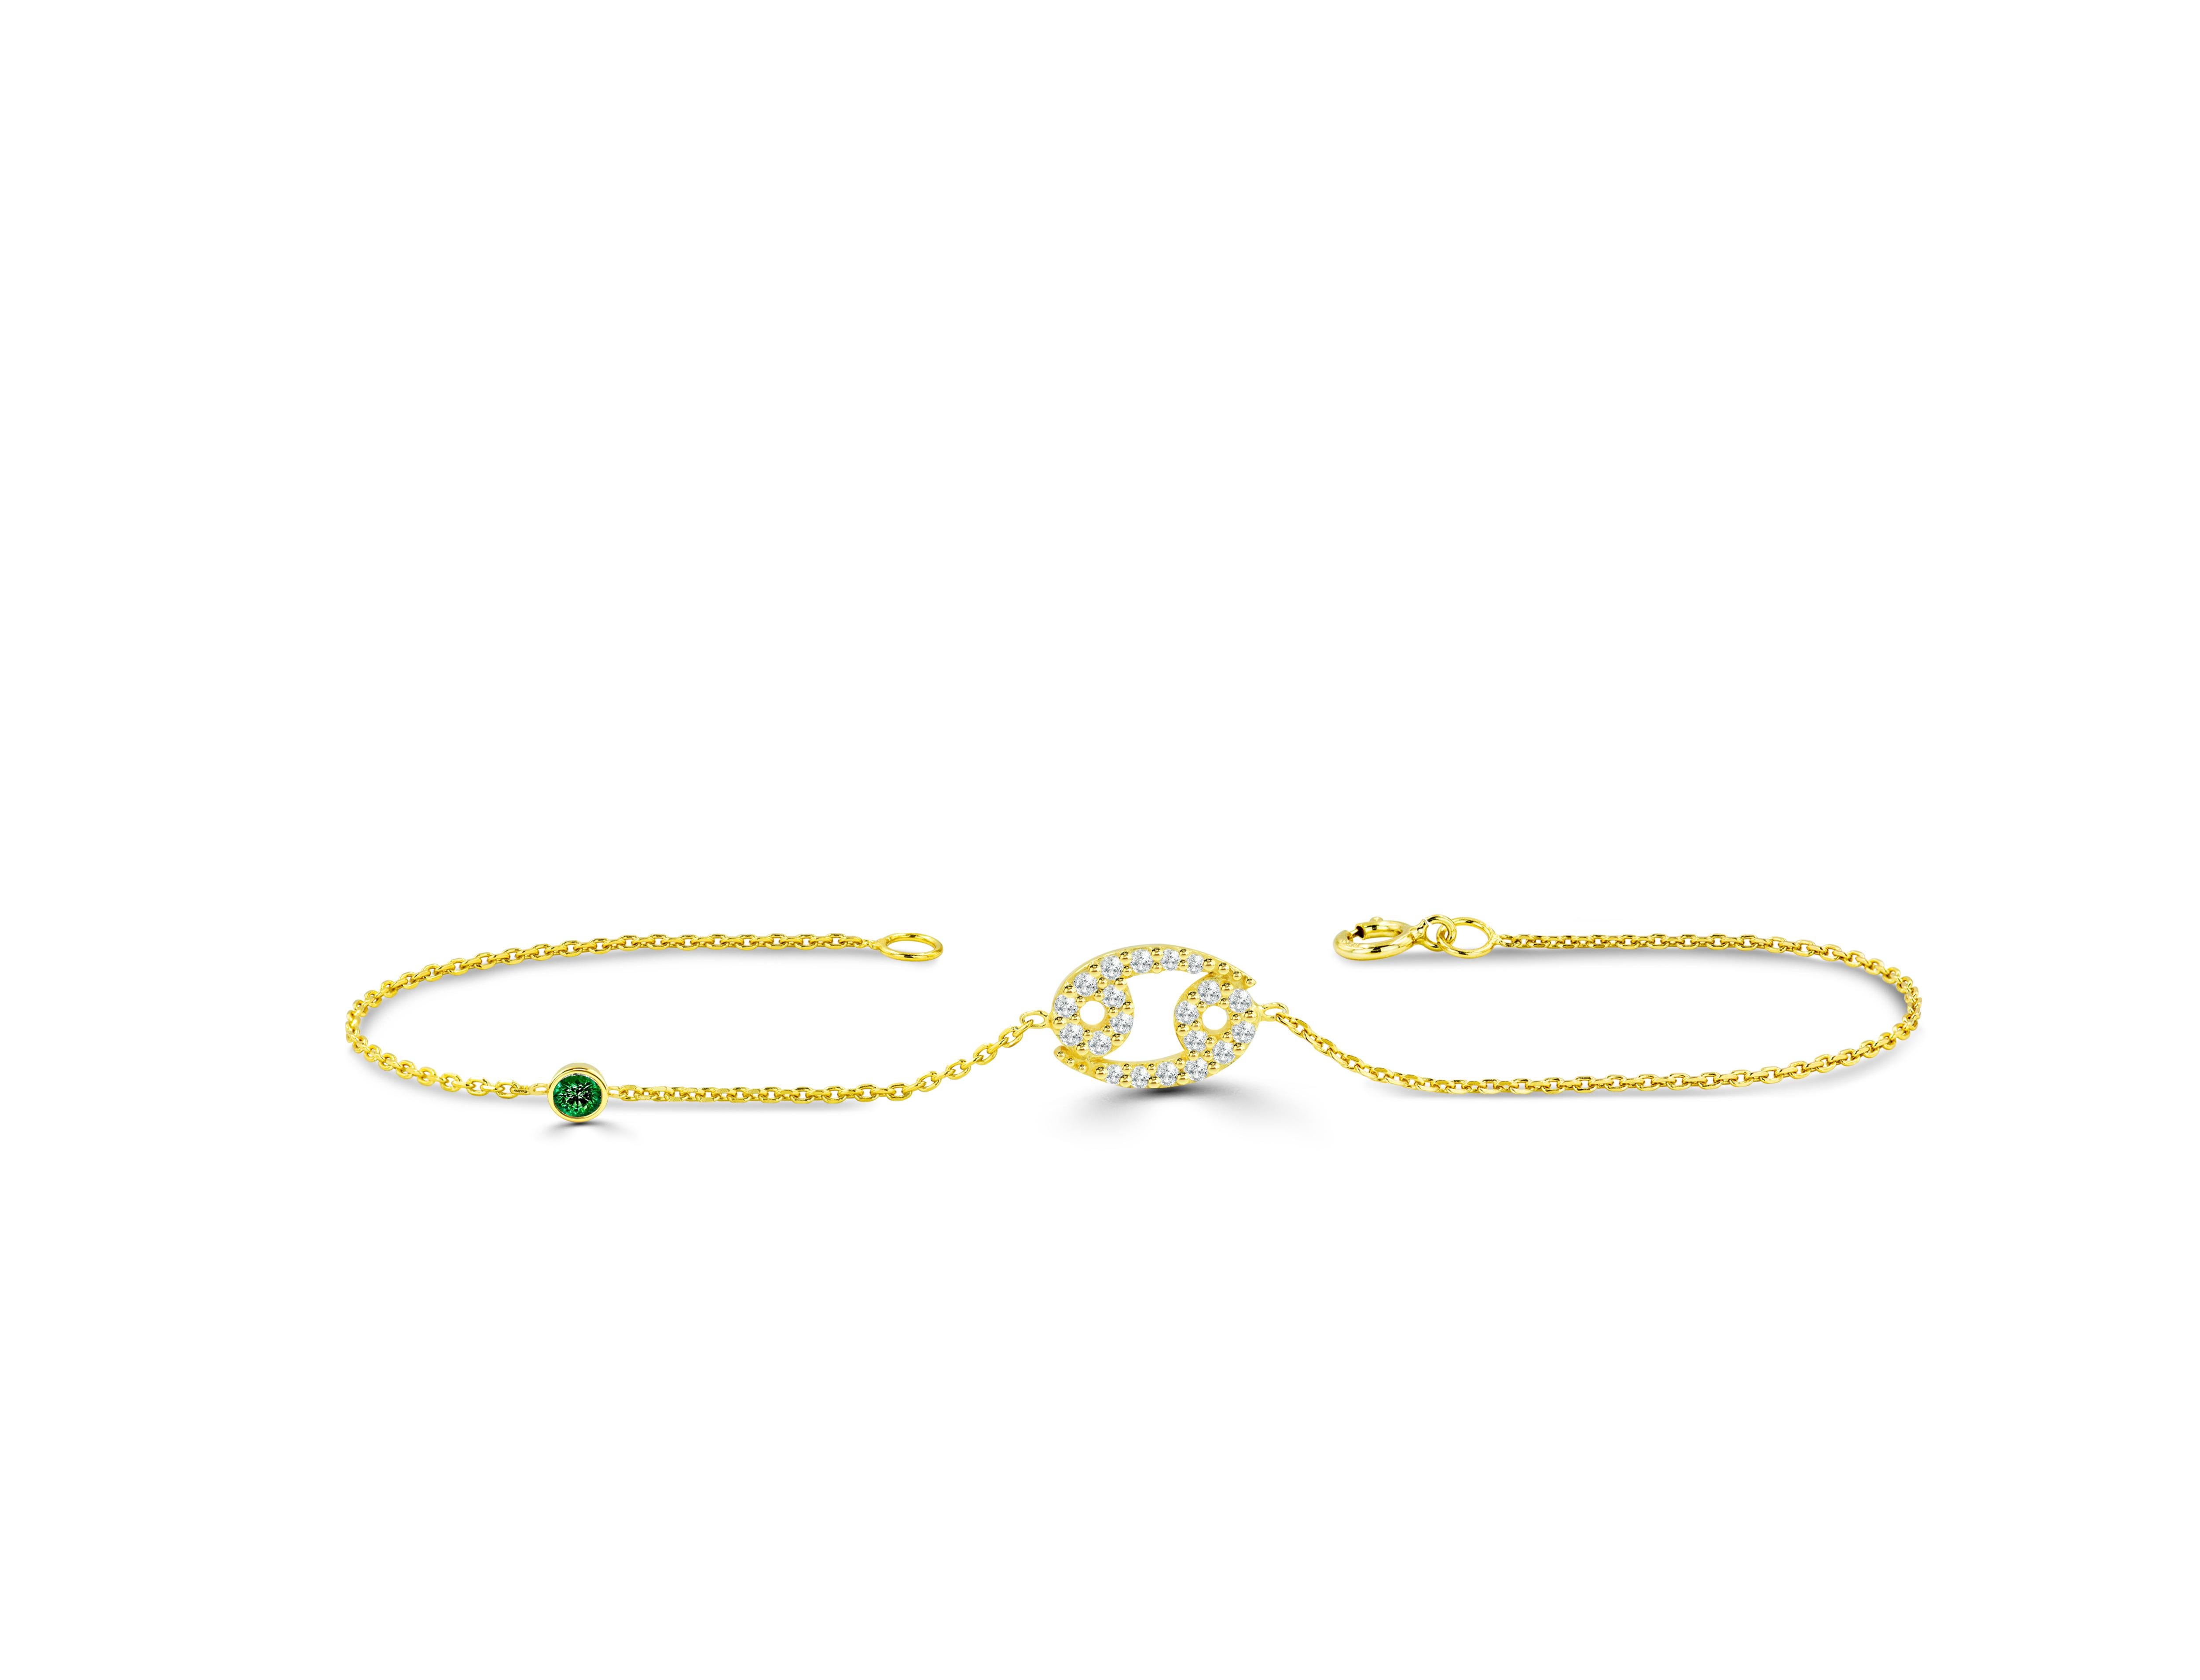 This Cancer Diamond Bracelet is meant to represent you. This Zodiac sign bracelet comes with a birthstone of your choice- Ruby, Sapphire, or Emerald. Our collection of zodiac jewelry includes this stunning Diamond Cancer Bracelet. All Cancers out